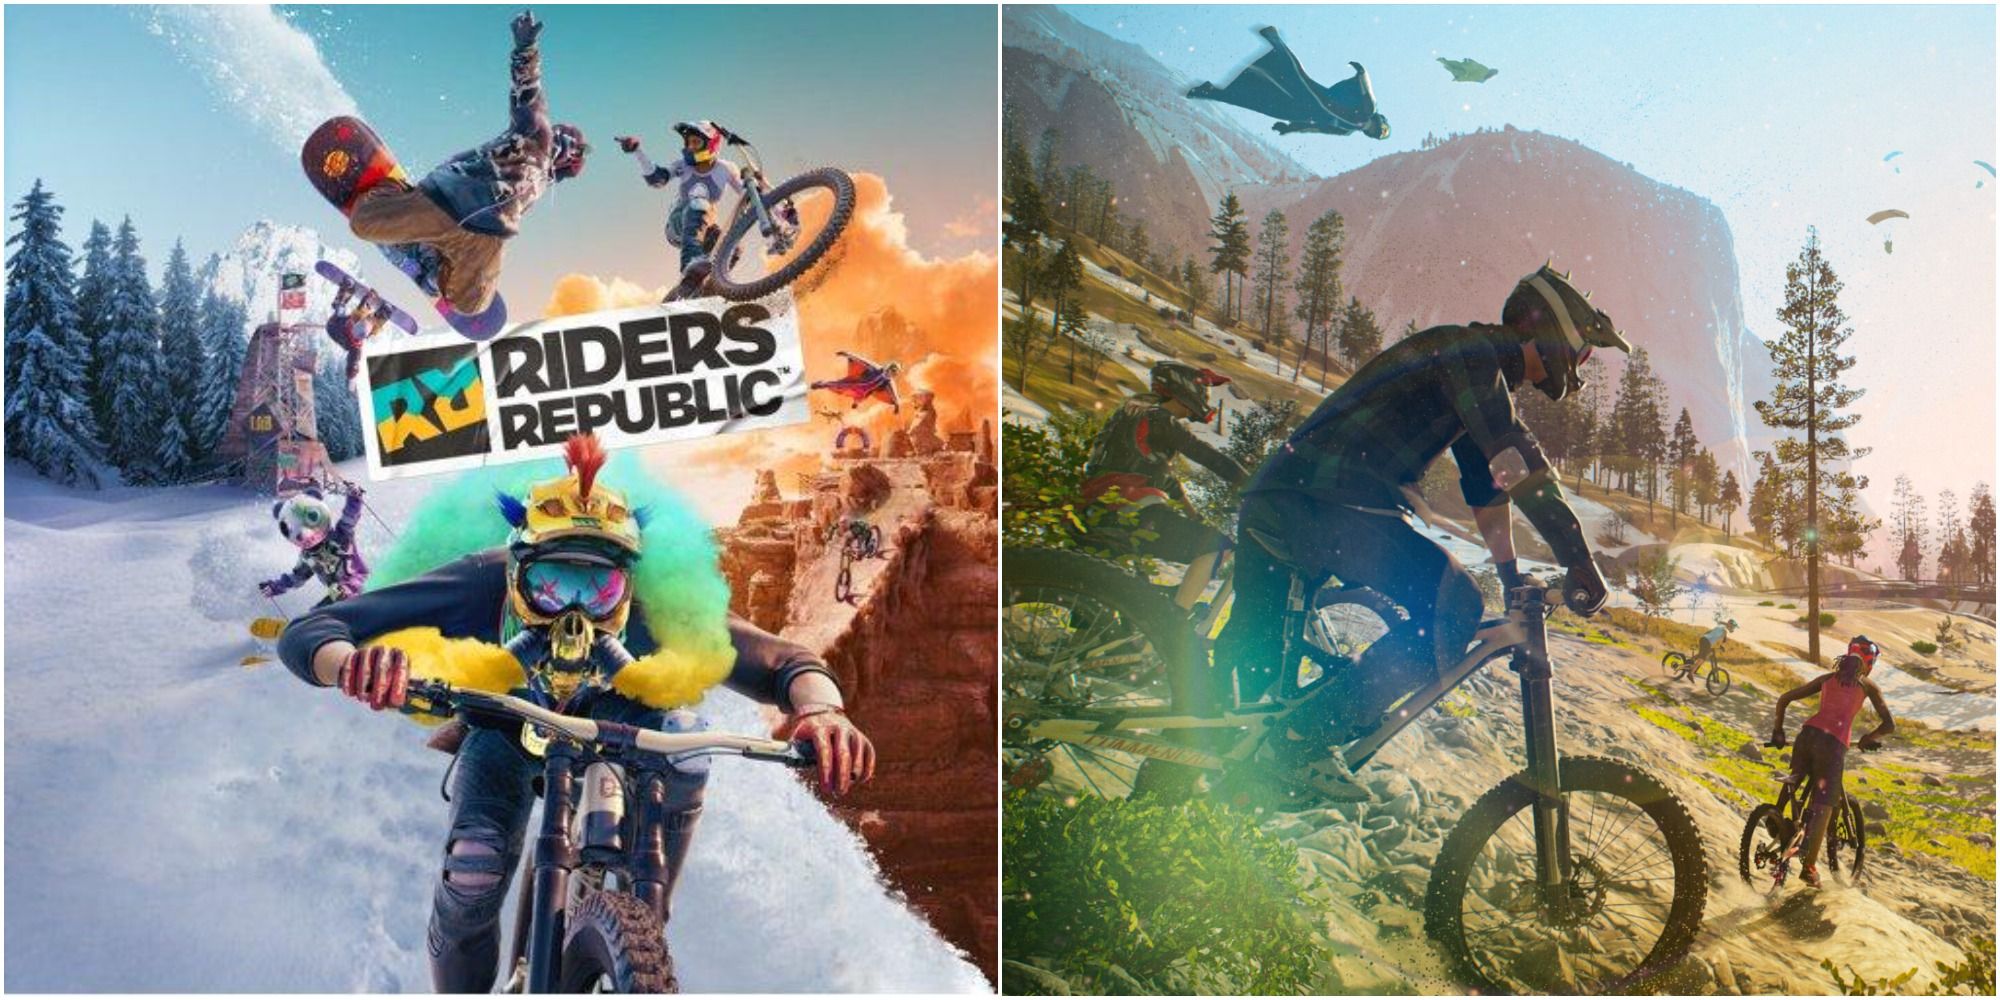 Riders republic featured image logo and cinematic screenshot